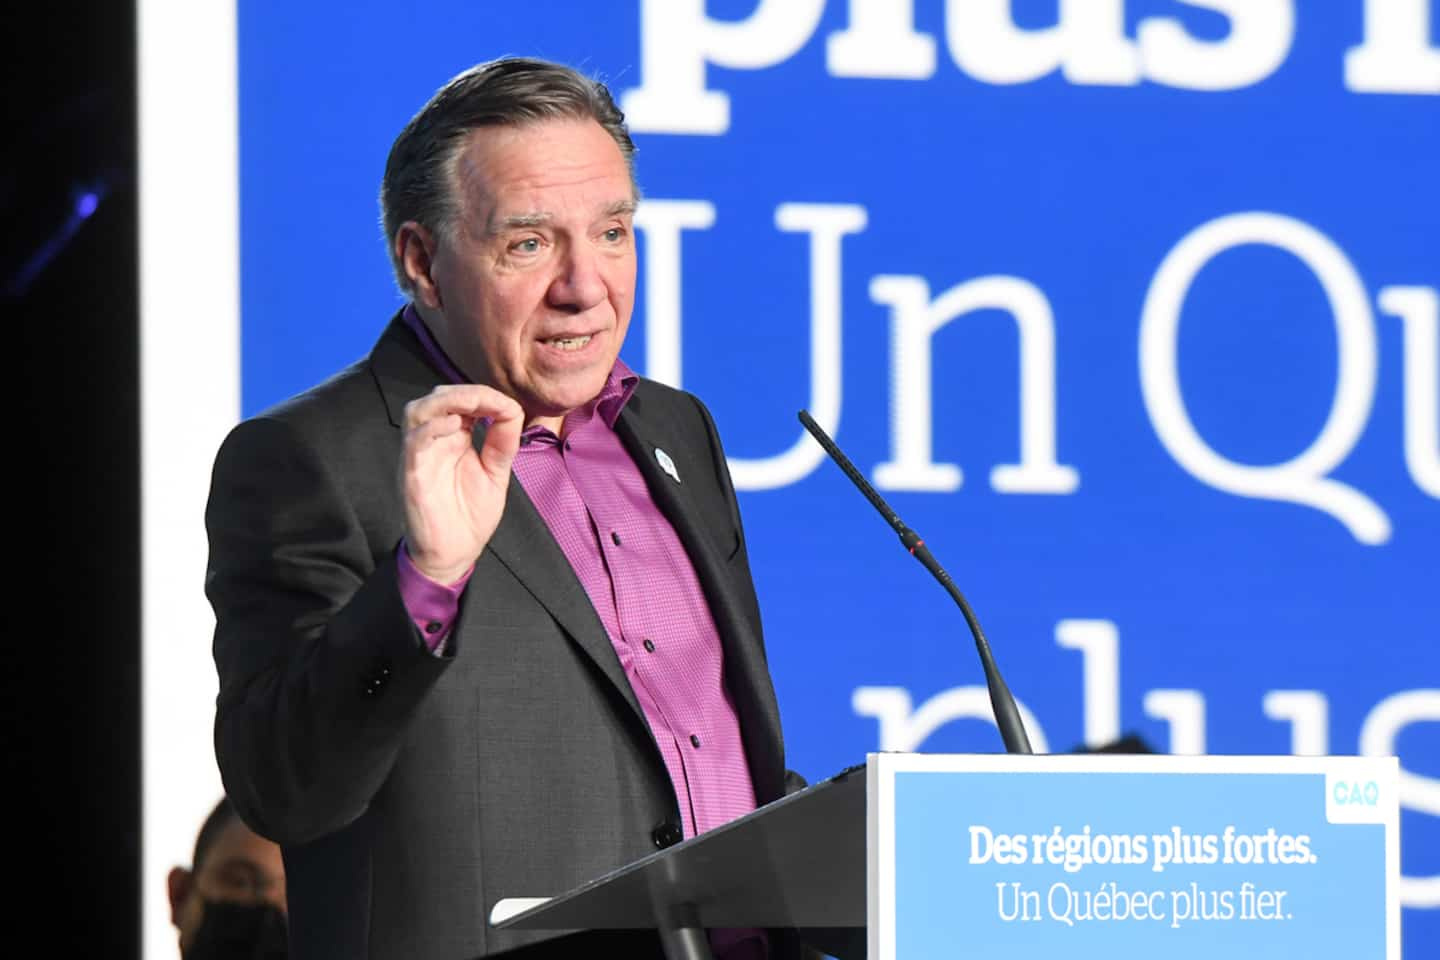 According to a star candidate of the PLQ: Legault has personality traits of a “narcissistic manipulator”